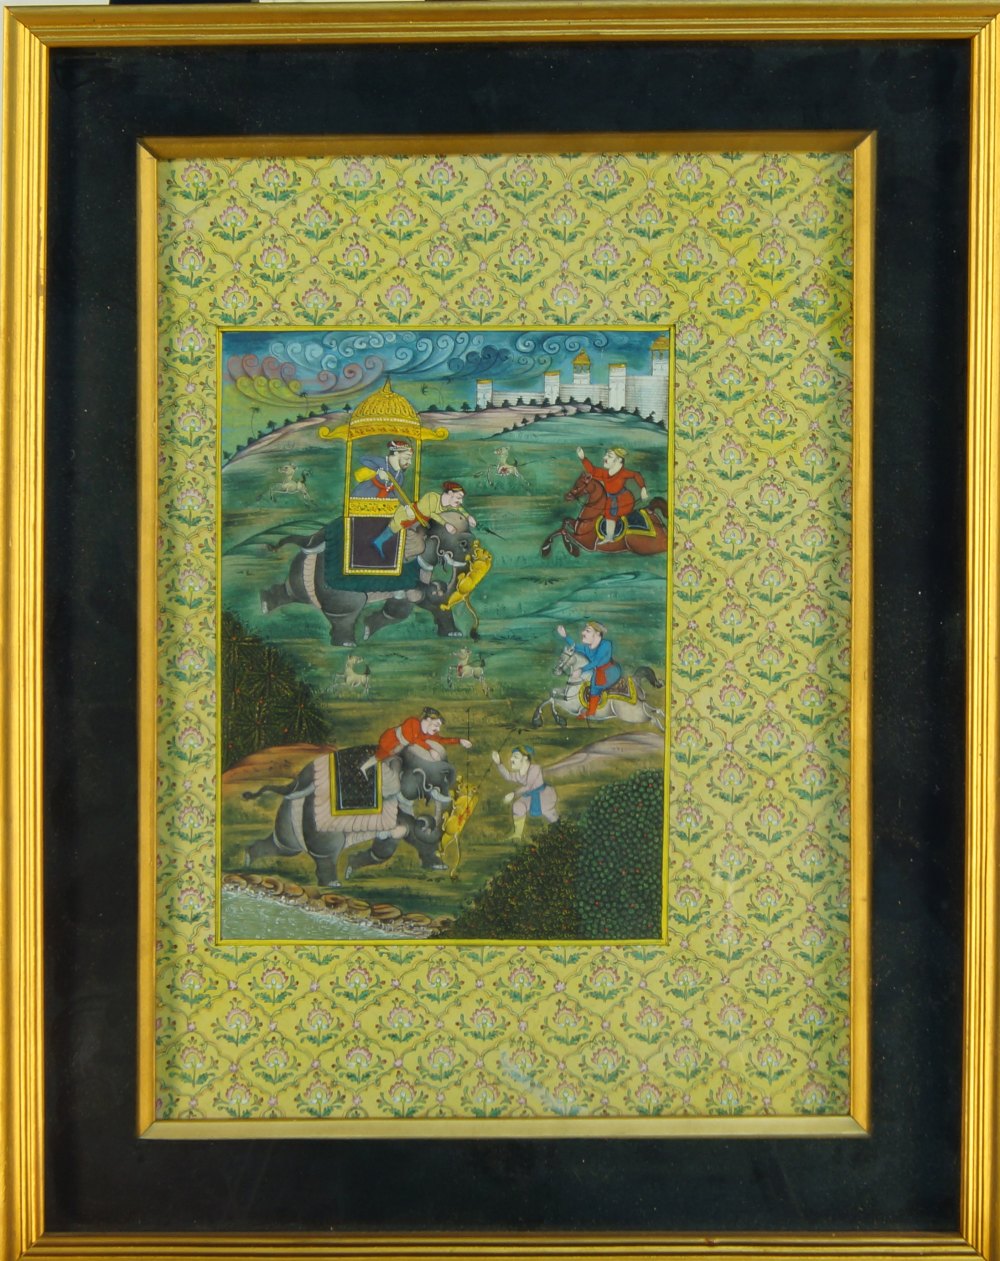 A Persian miniature painting, early 20th century, depicting a hunting scene with nobles riding - Image 2 of 2